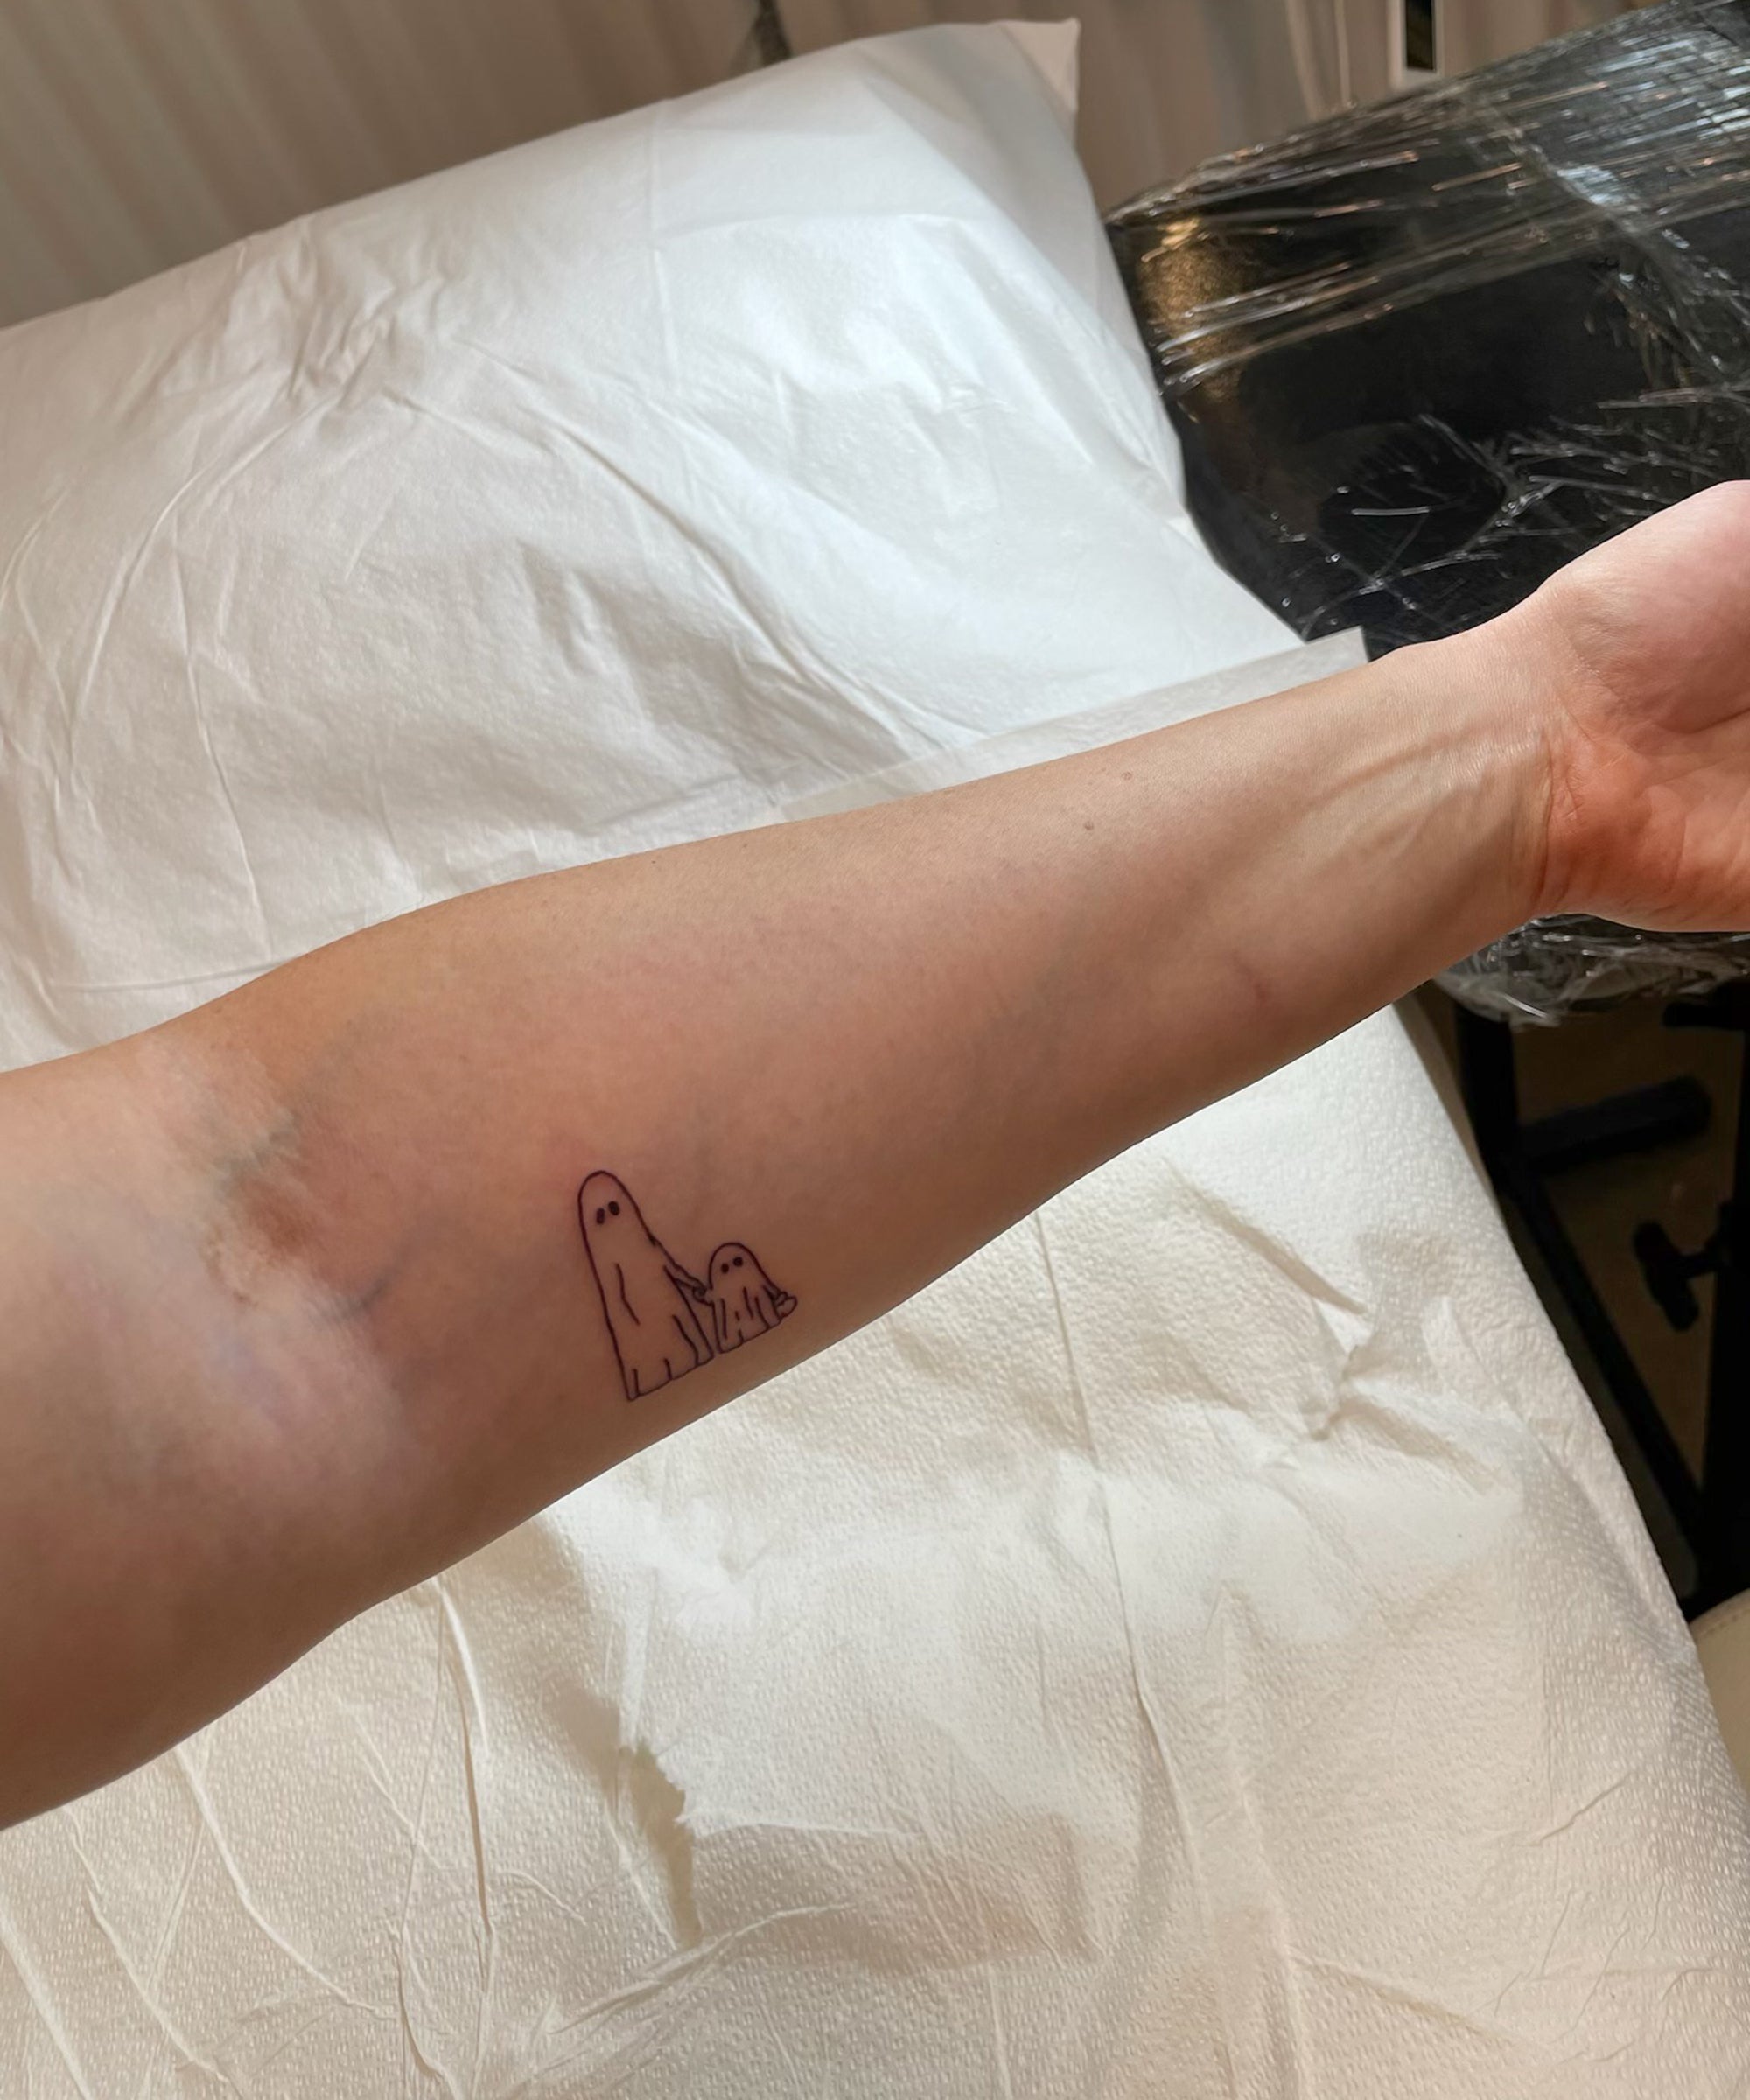 10 Best Ways to Improve Laser Tattoo Removal Process and Fading